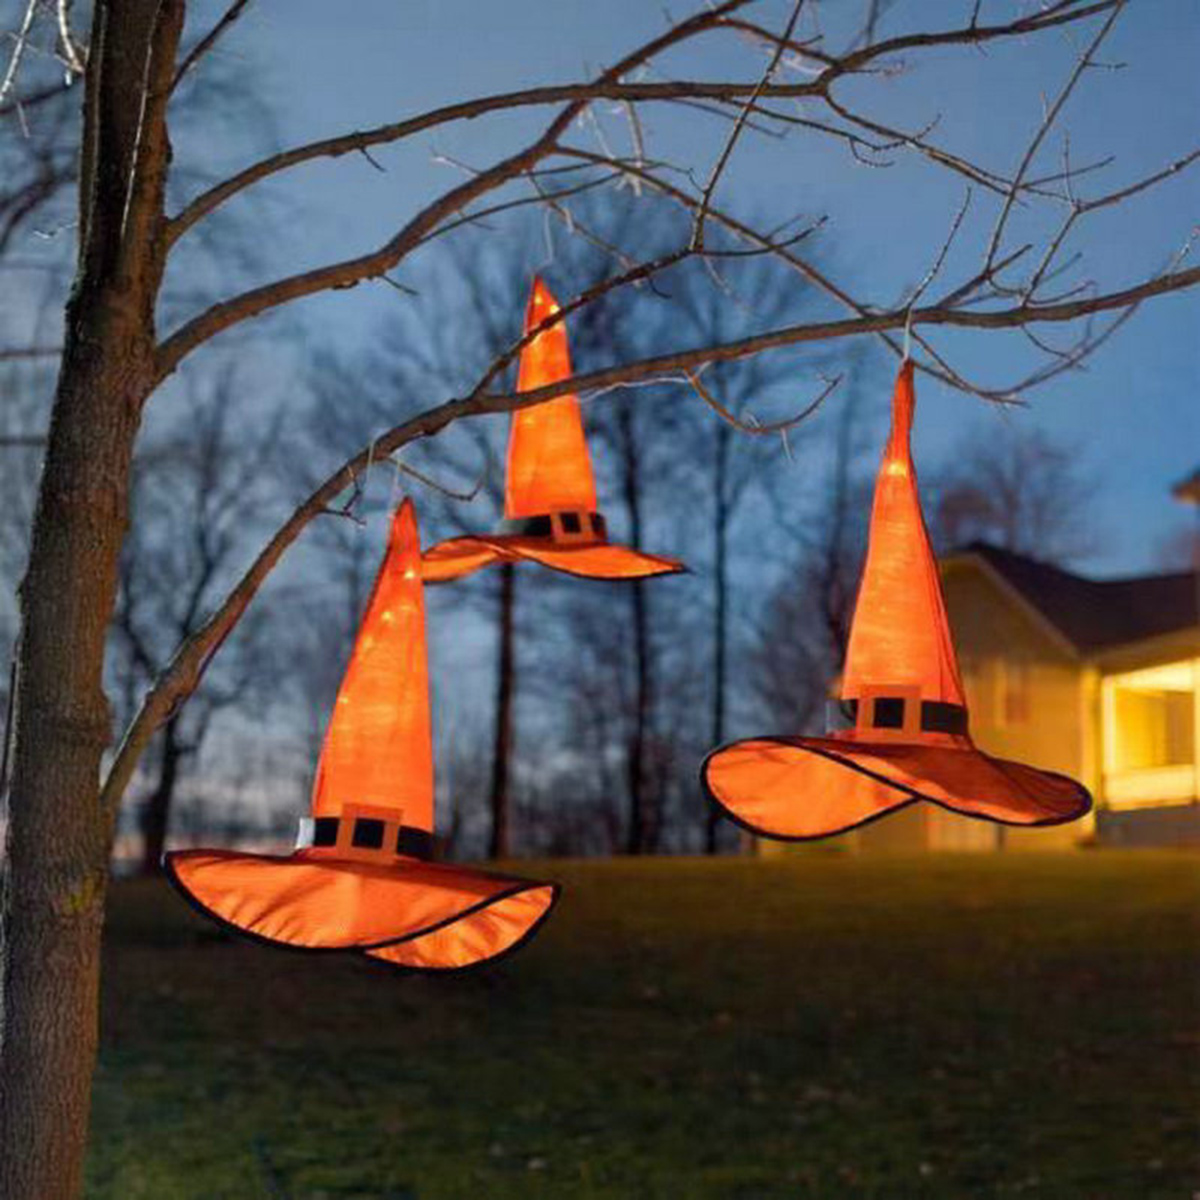 Halloween-Hanging-LED-Witch-Hat-Party-Prop-Decor-Costume-Cosplay-Accessory-Supply-1714367-2